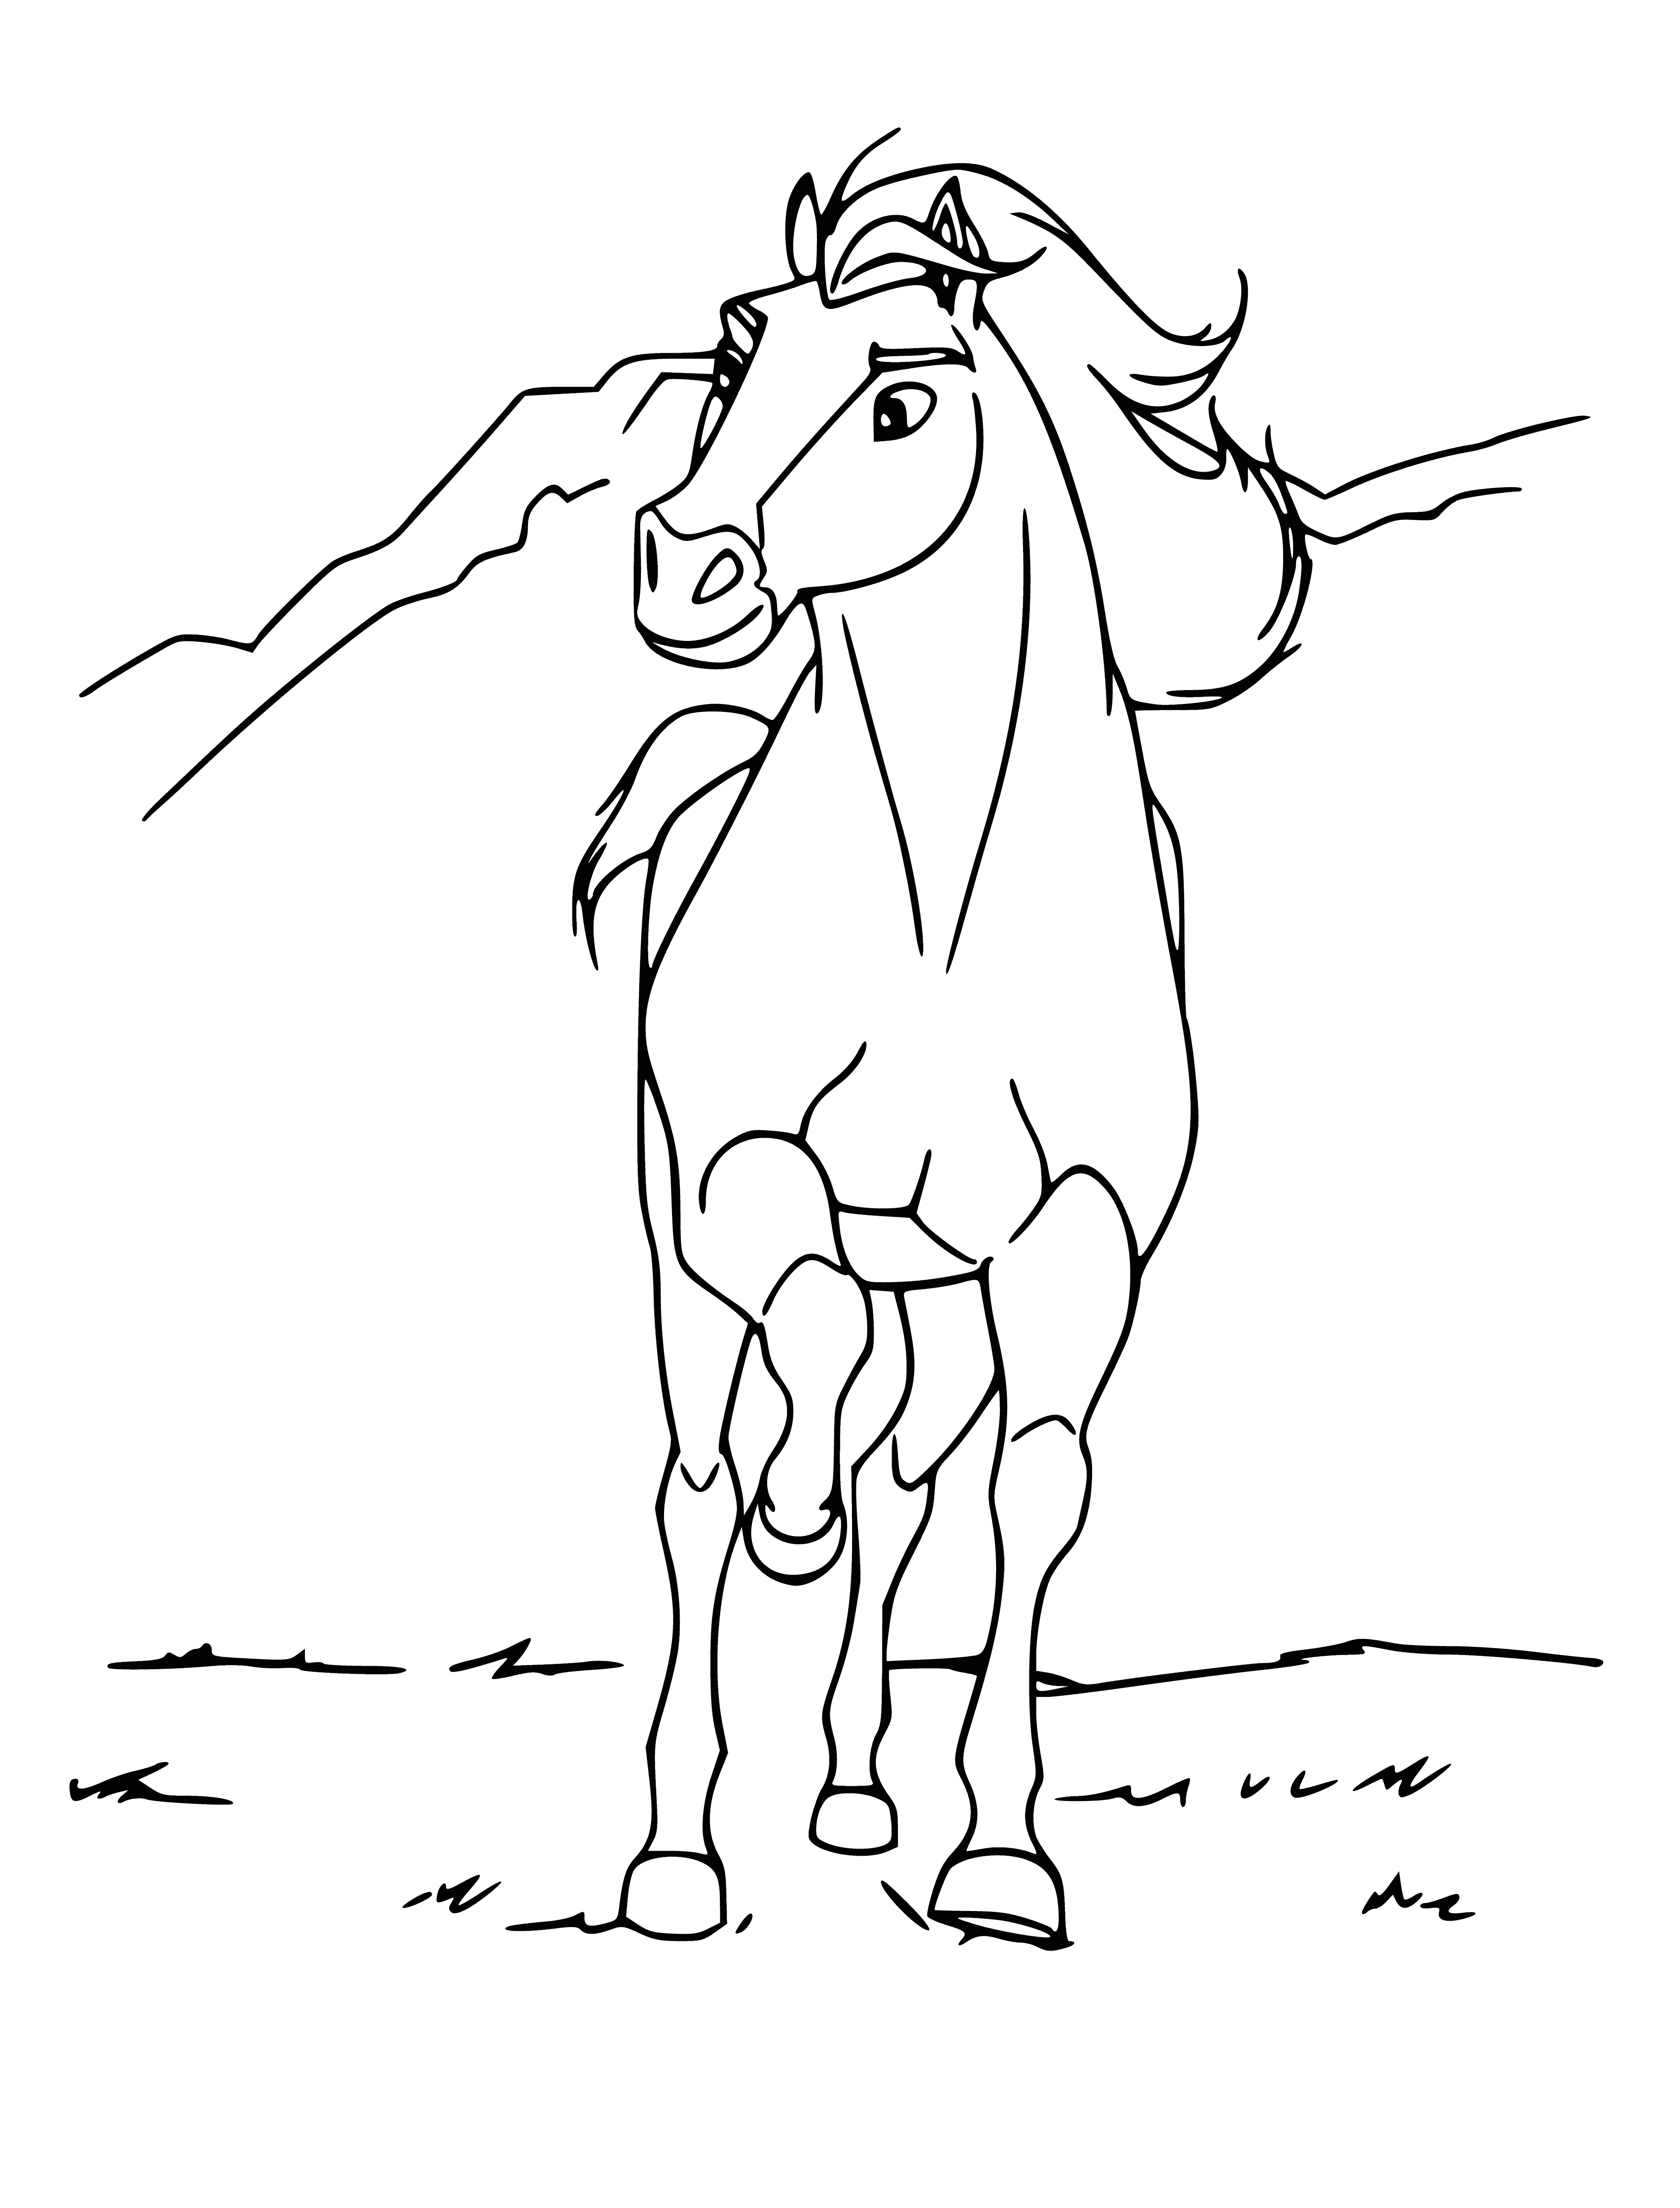 coloring page: Describe the coloring page on the coloring page: A mustang stallion with a light coat, black mane, and dark eyes is standing on a hill surrounded by grass and trees. He looks strong and powerful.